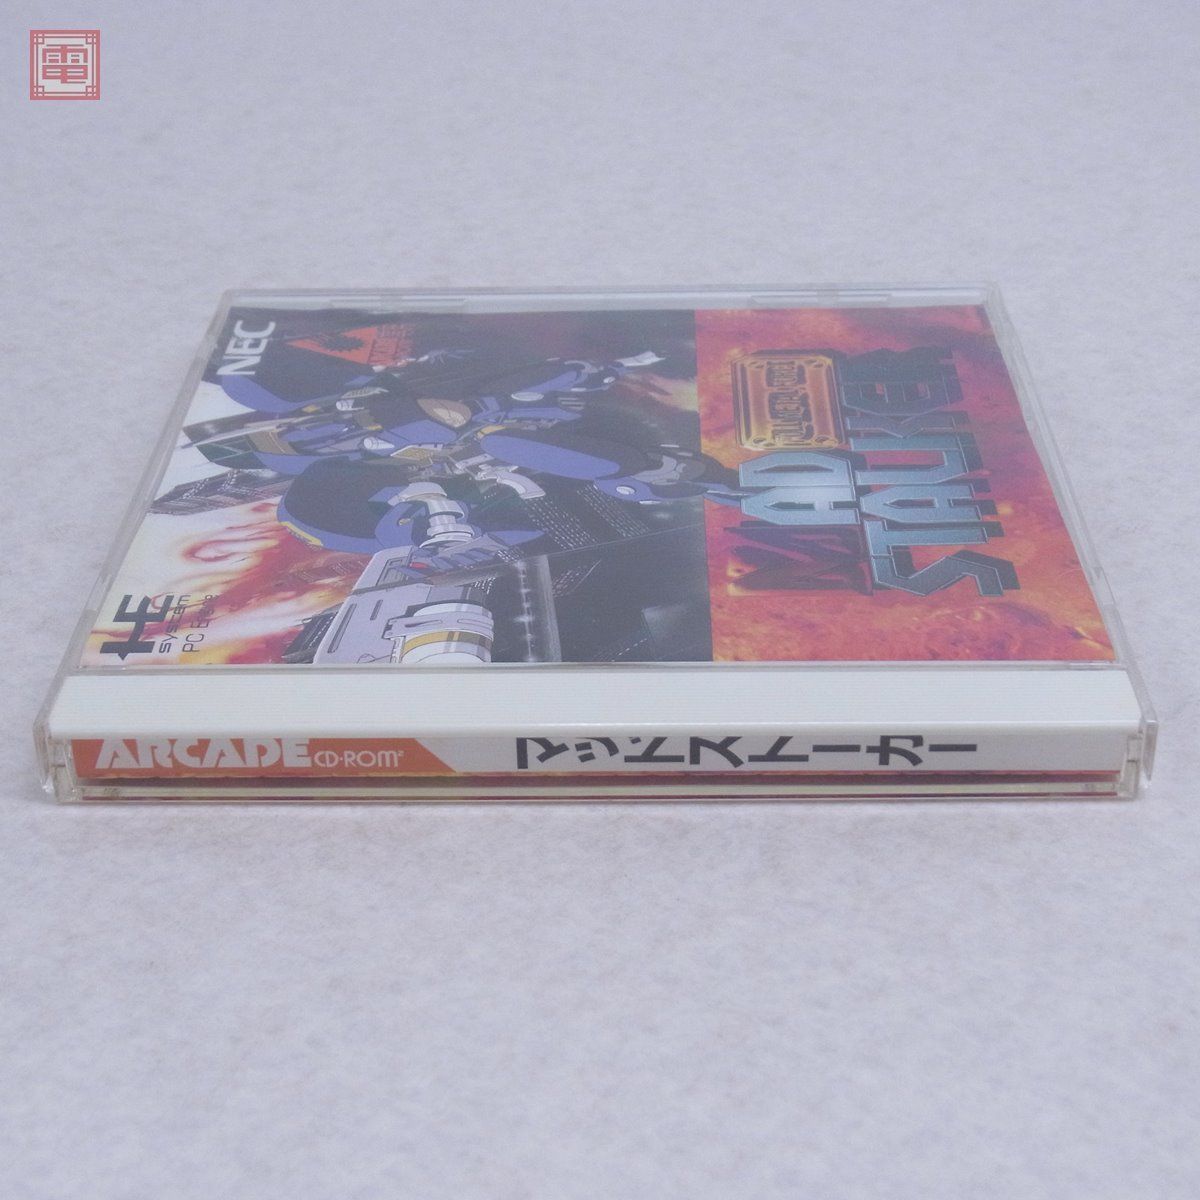 PCE PCエンジン ARCADE CD-ROM2 FULL METAL FORCE マッドストーカー MAD STALKER NEC 工画堂 KOGADO Fill in Cafe 箱説帯付【10の画像6